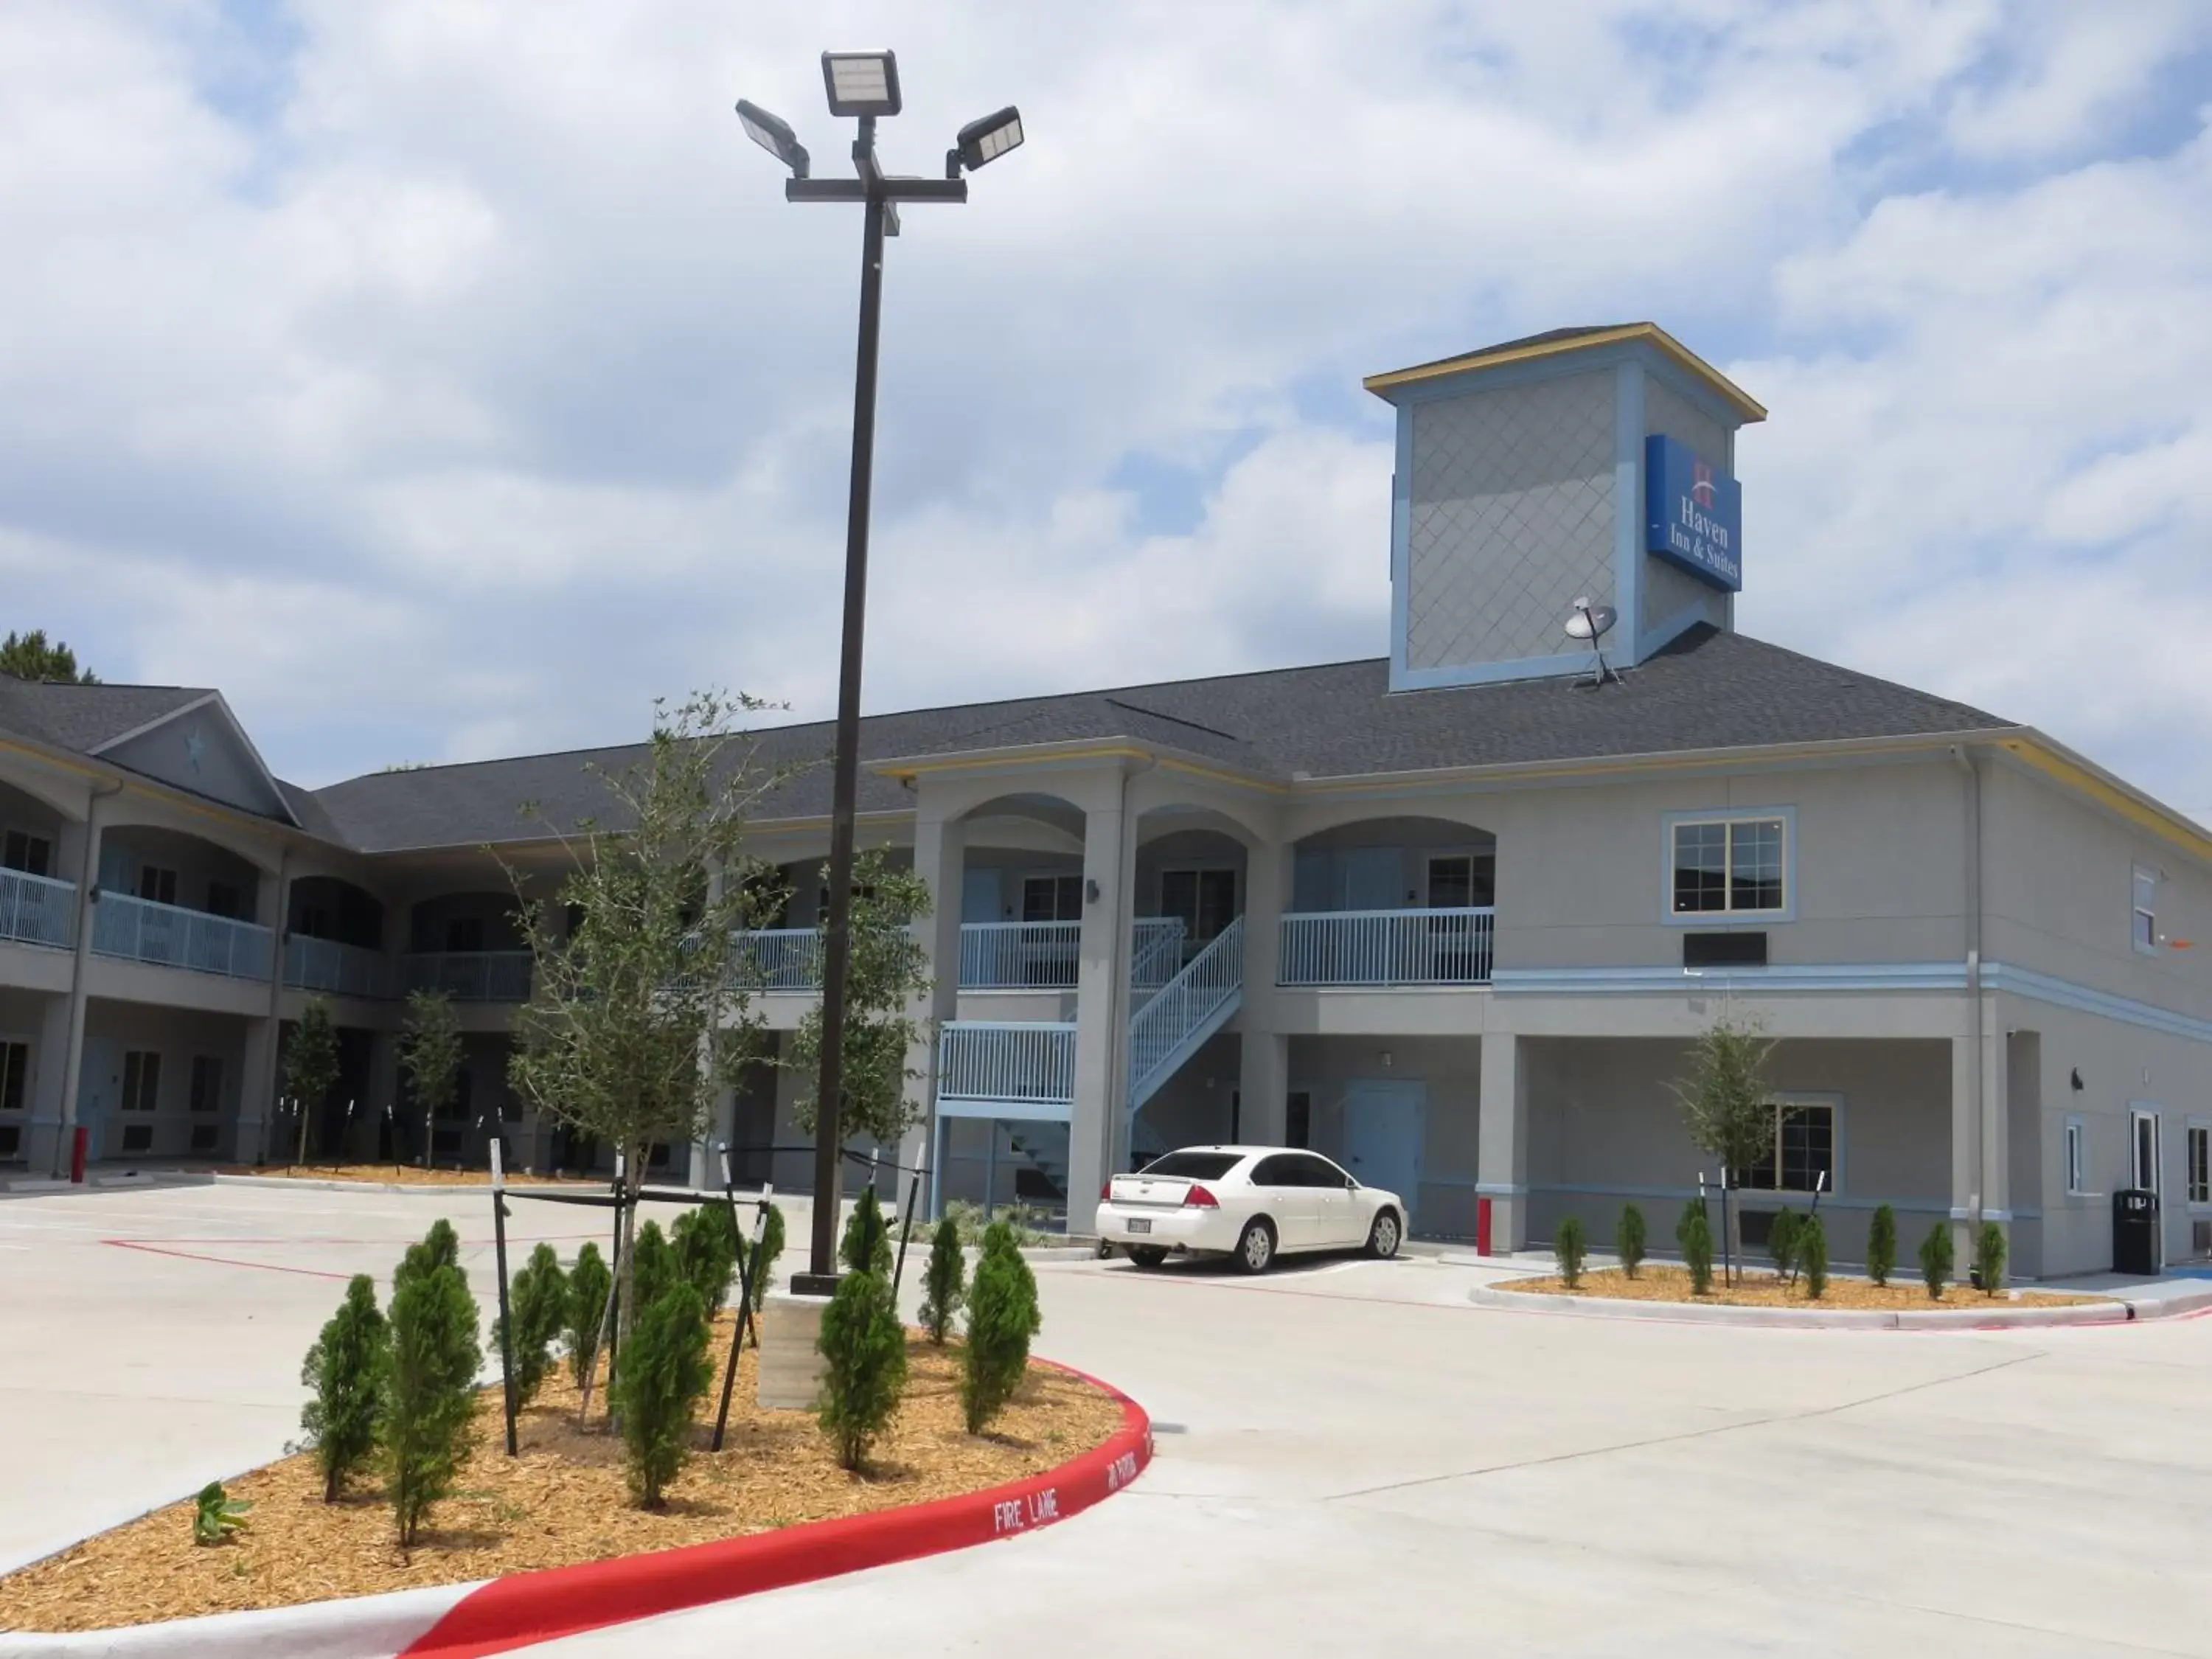 Property Building in Haven Inn & Suites willowbrook